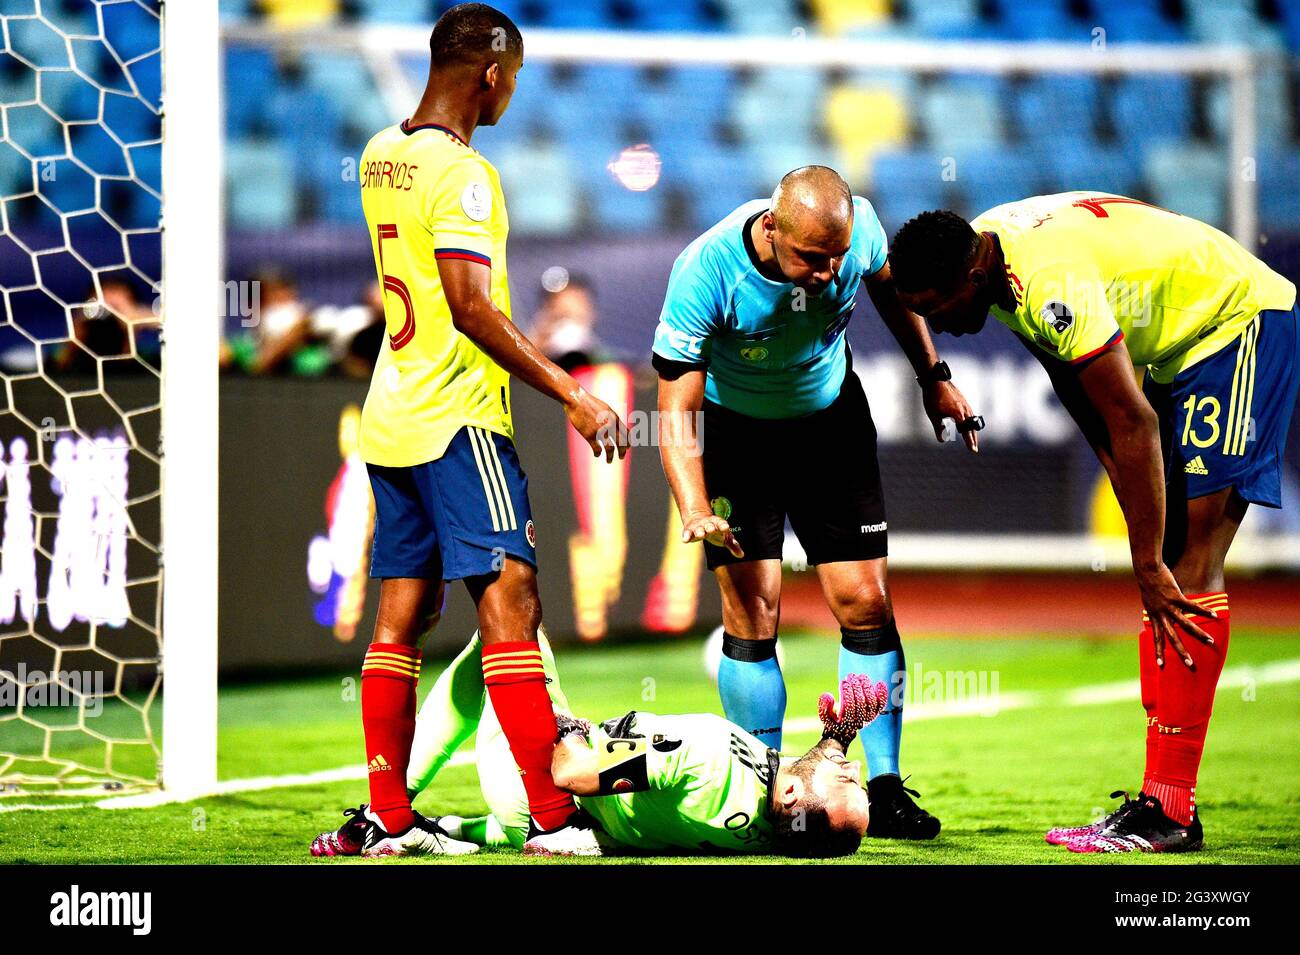 GOIANIA, BRAZIL - JUNE 17: David Ospina of Colombia Injuried ,during the match between Colombia and Venezuela as part of Conmebol Copa America Brazil 2021 at Estadio Olimpico on June 17, 2021 in Goiania, Brazil. (Photo by MB Media) Stock Photo